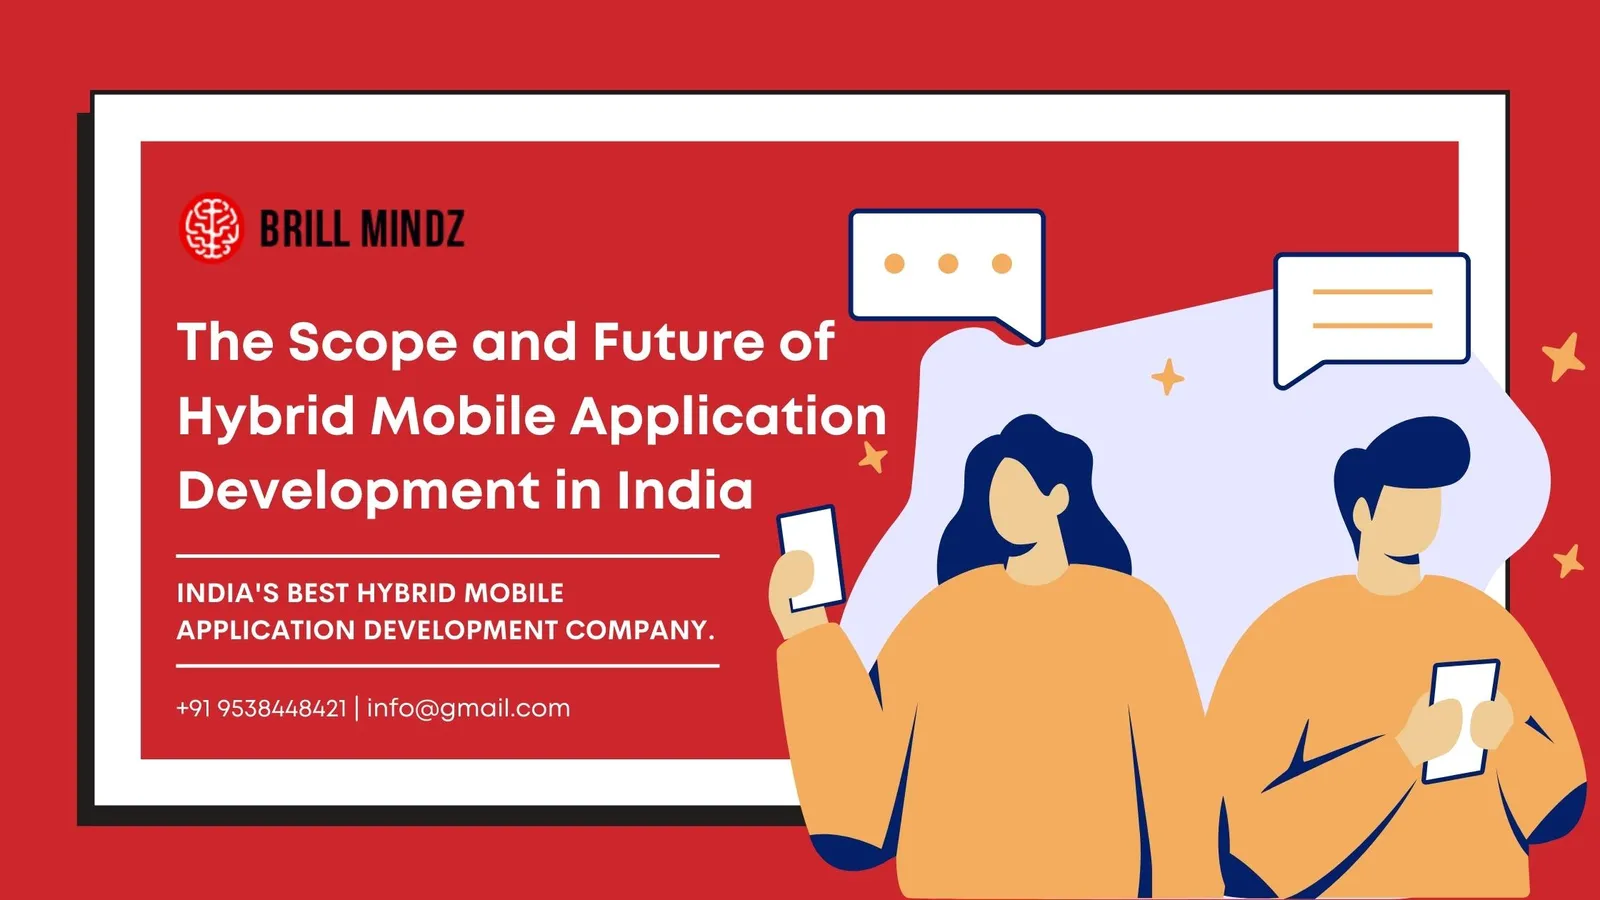 The scope and future of hybrid mobile application development in India